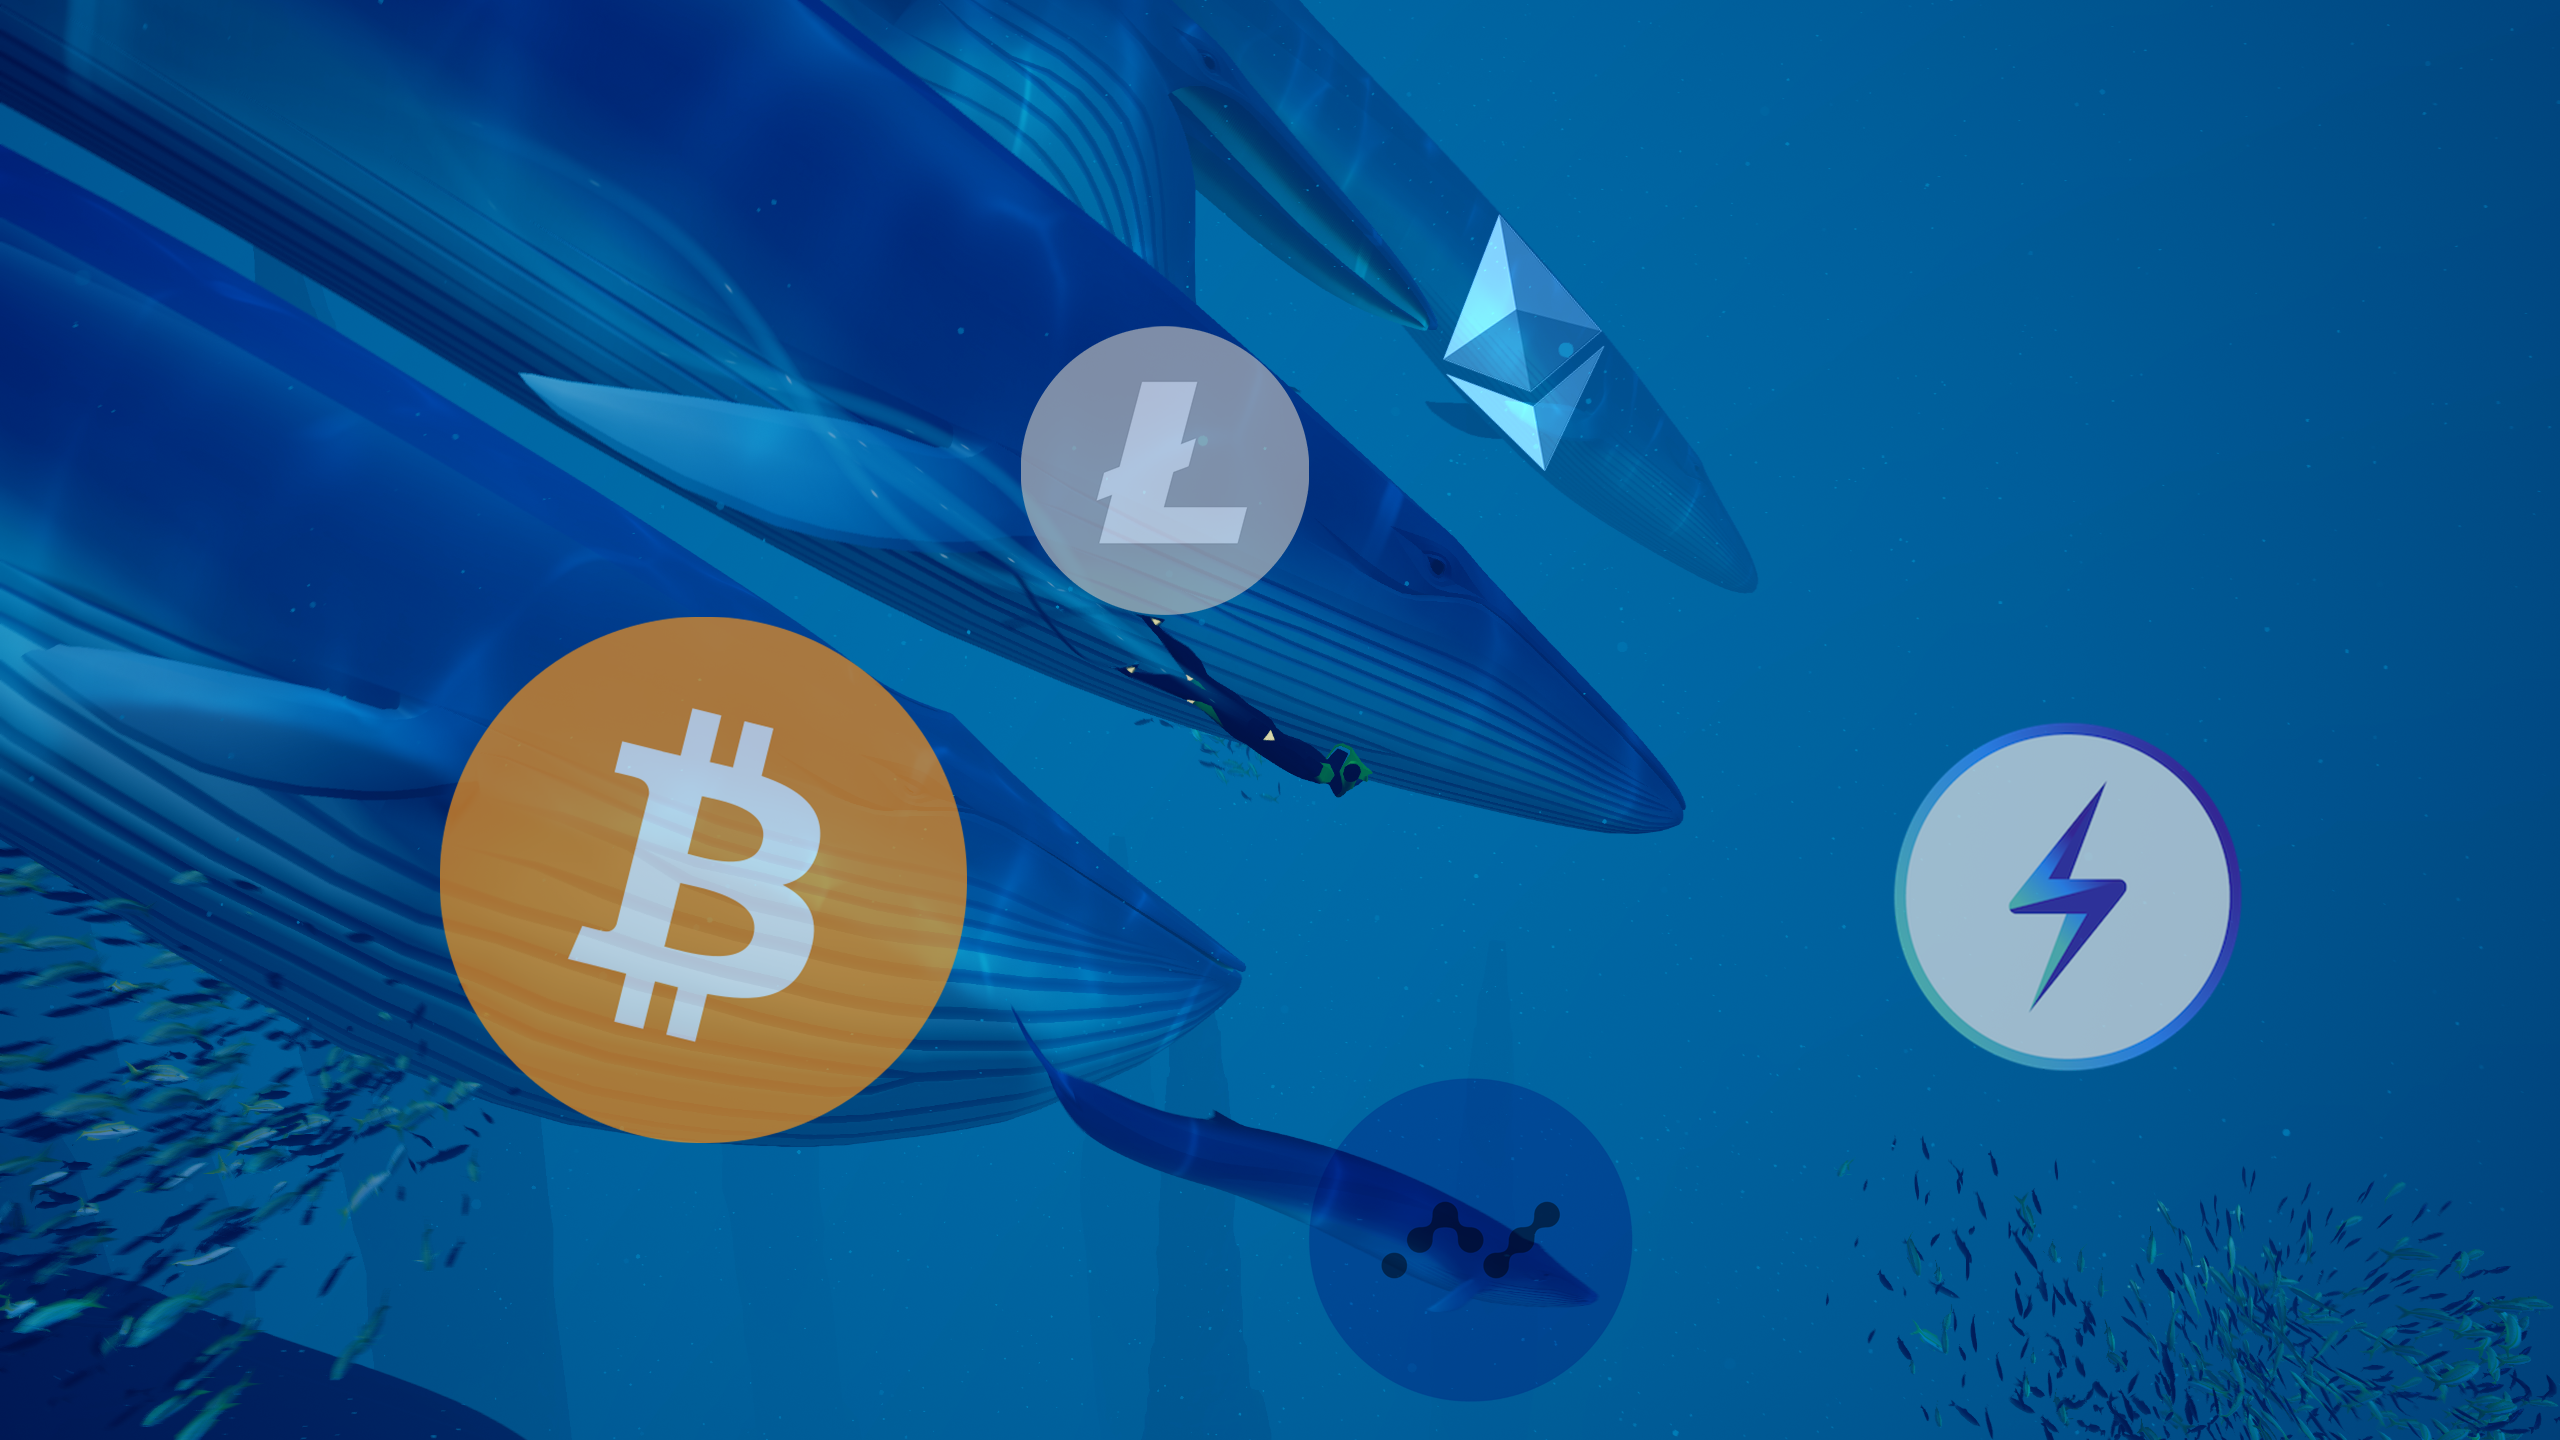 CryptoWhales_wallpaper_v2.png